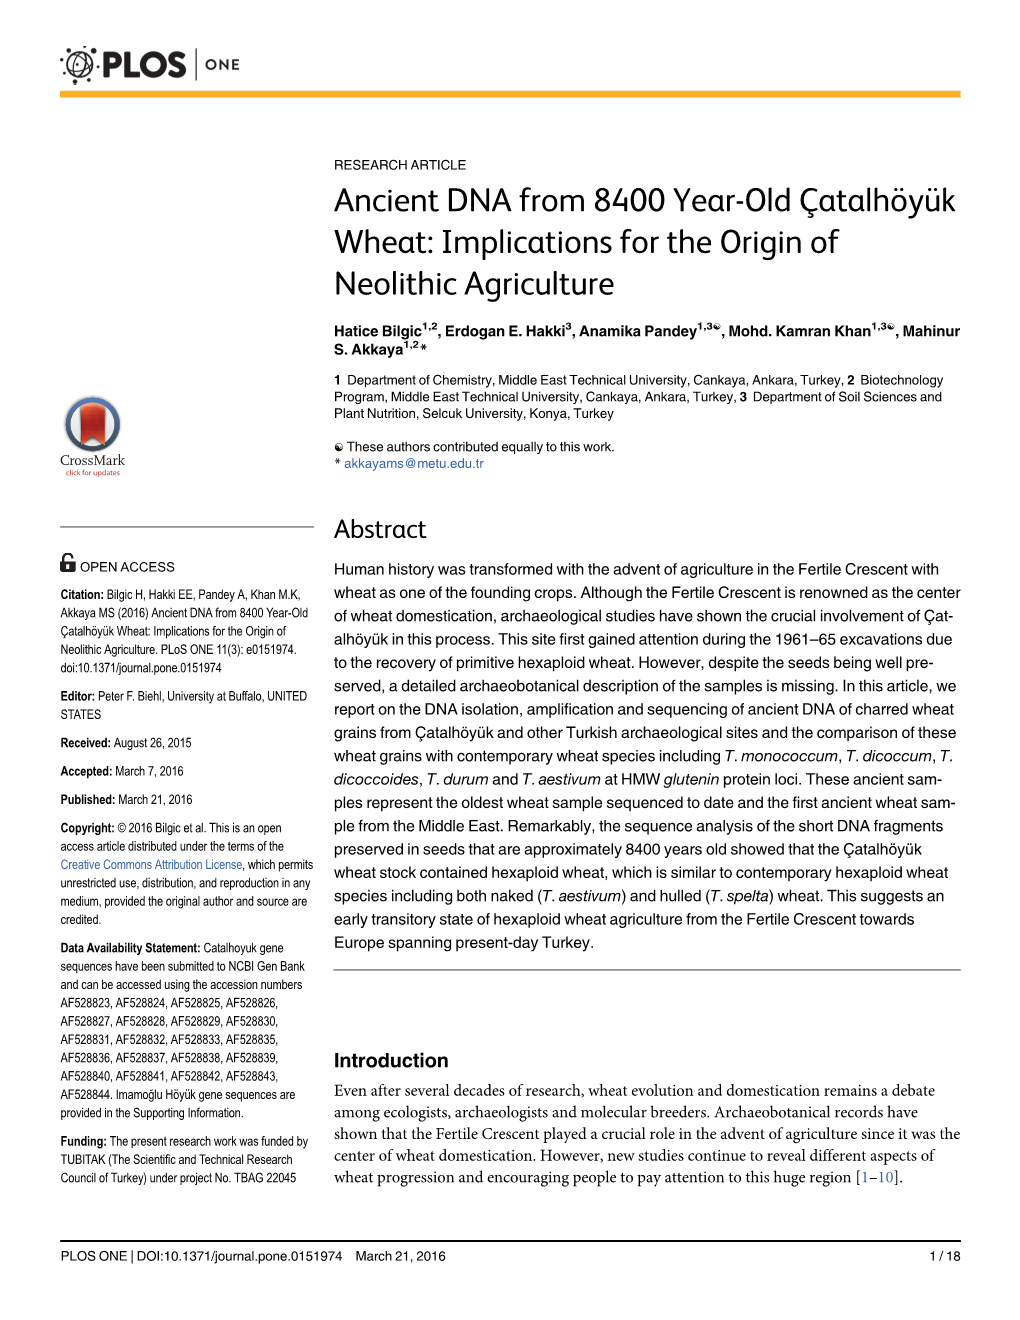 Ancient DNA from 8400 Year-Old Çatalhöyük Wheat: Implications for the Origin of Neolithic Agriculture